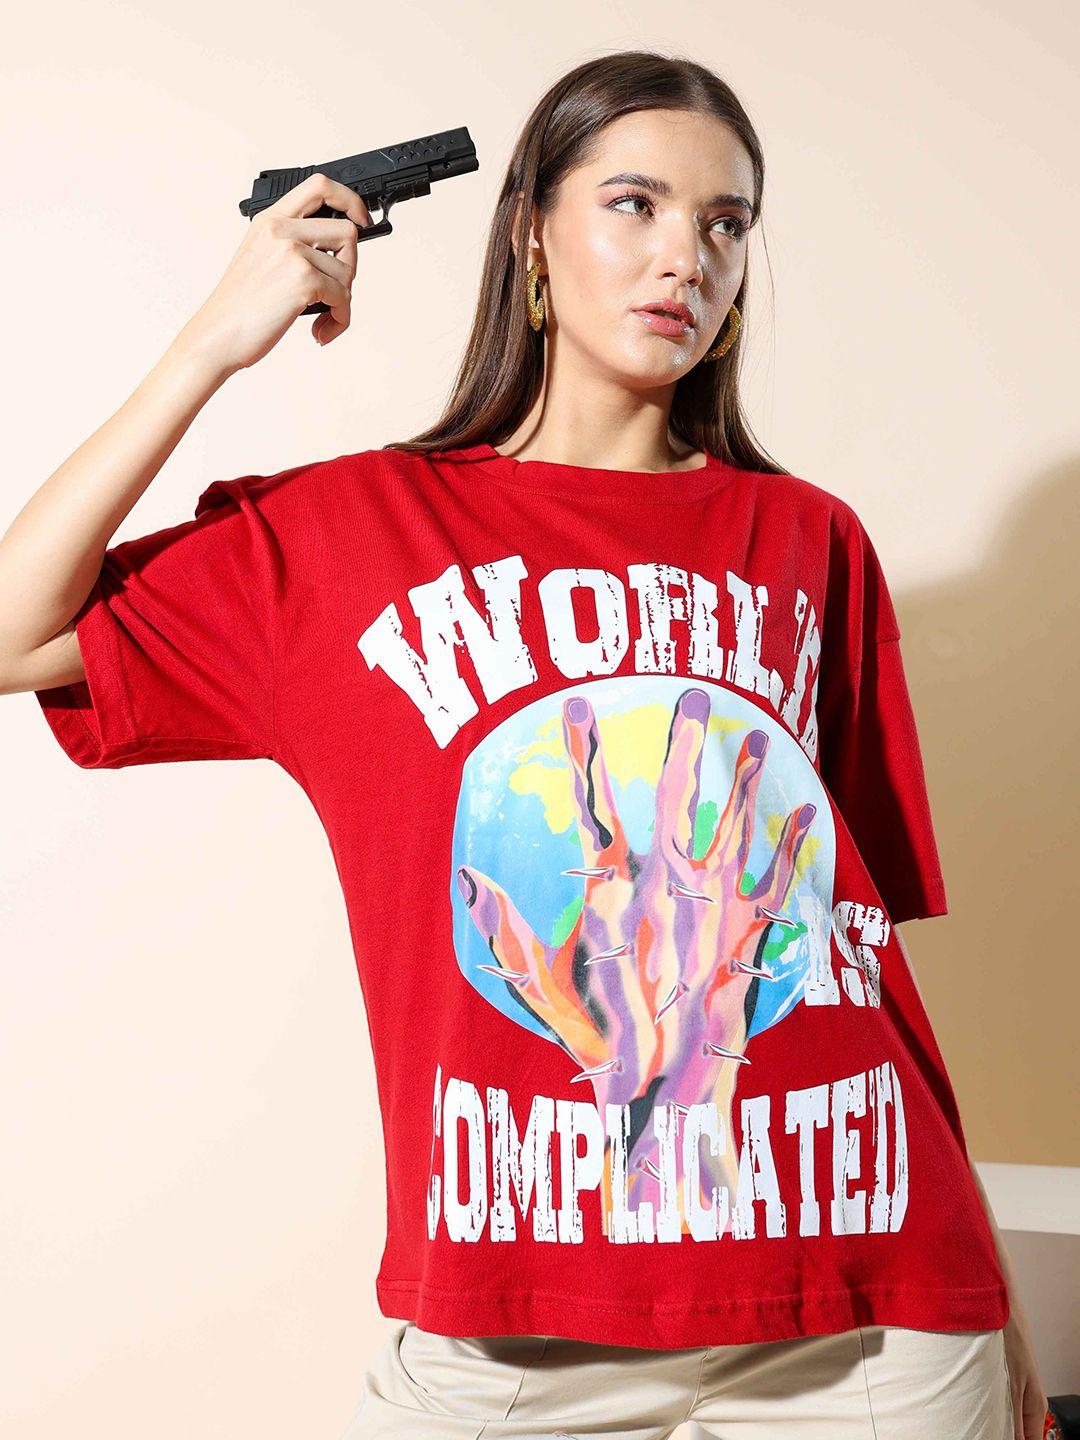 stylecast x hersheinbox red graphic printed drop-shoulder relaxed fit pure cotton t-shirt